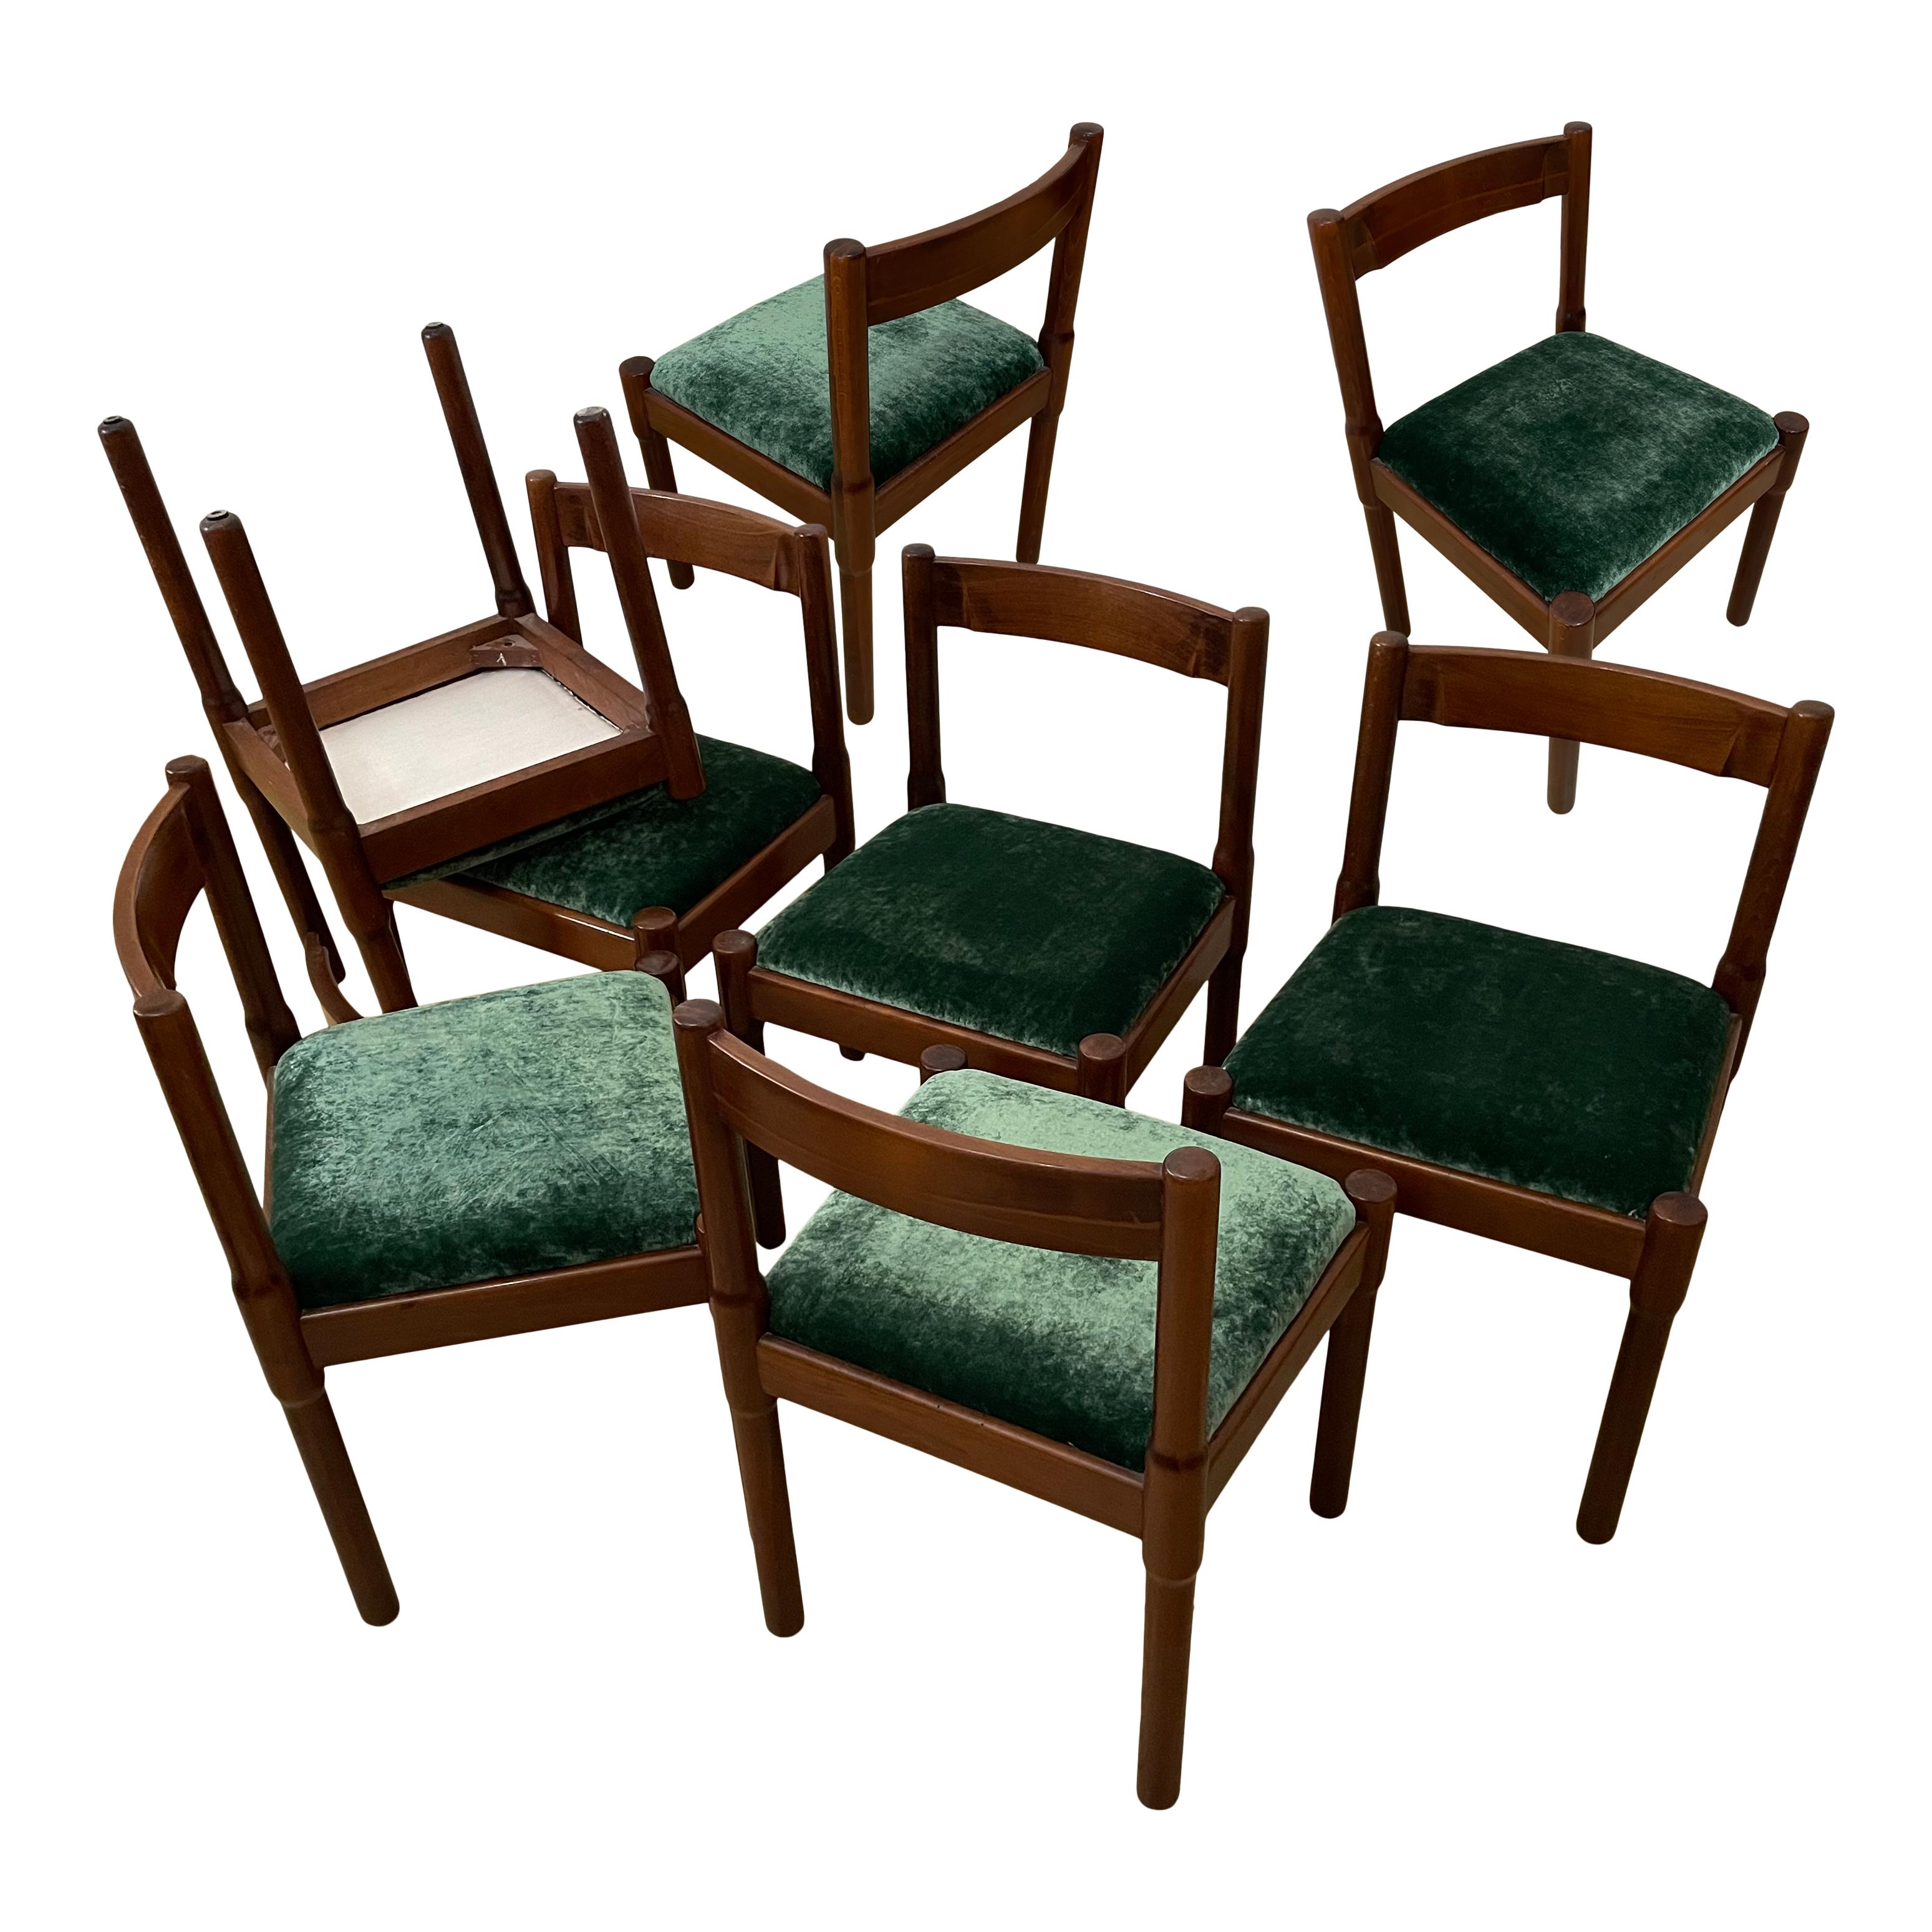  Set of 8 “Carimate” chairs designed by Vico Magistretti and produced by Cassina in 1963.

Initially commissioned for the Carimate Golf club near Milan, they were then produced for the public by Cassina.

Structure in brown beechwood, seating in